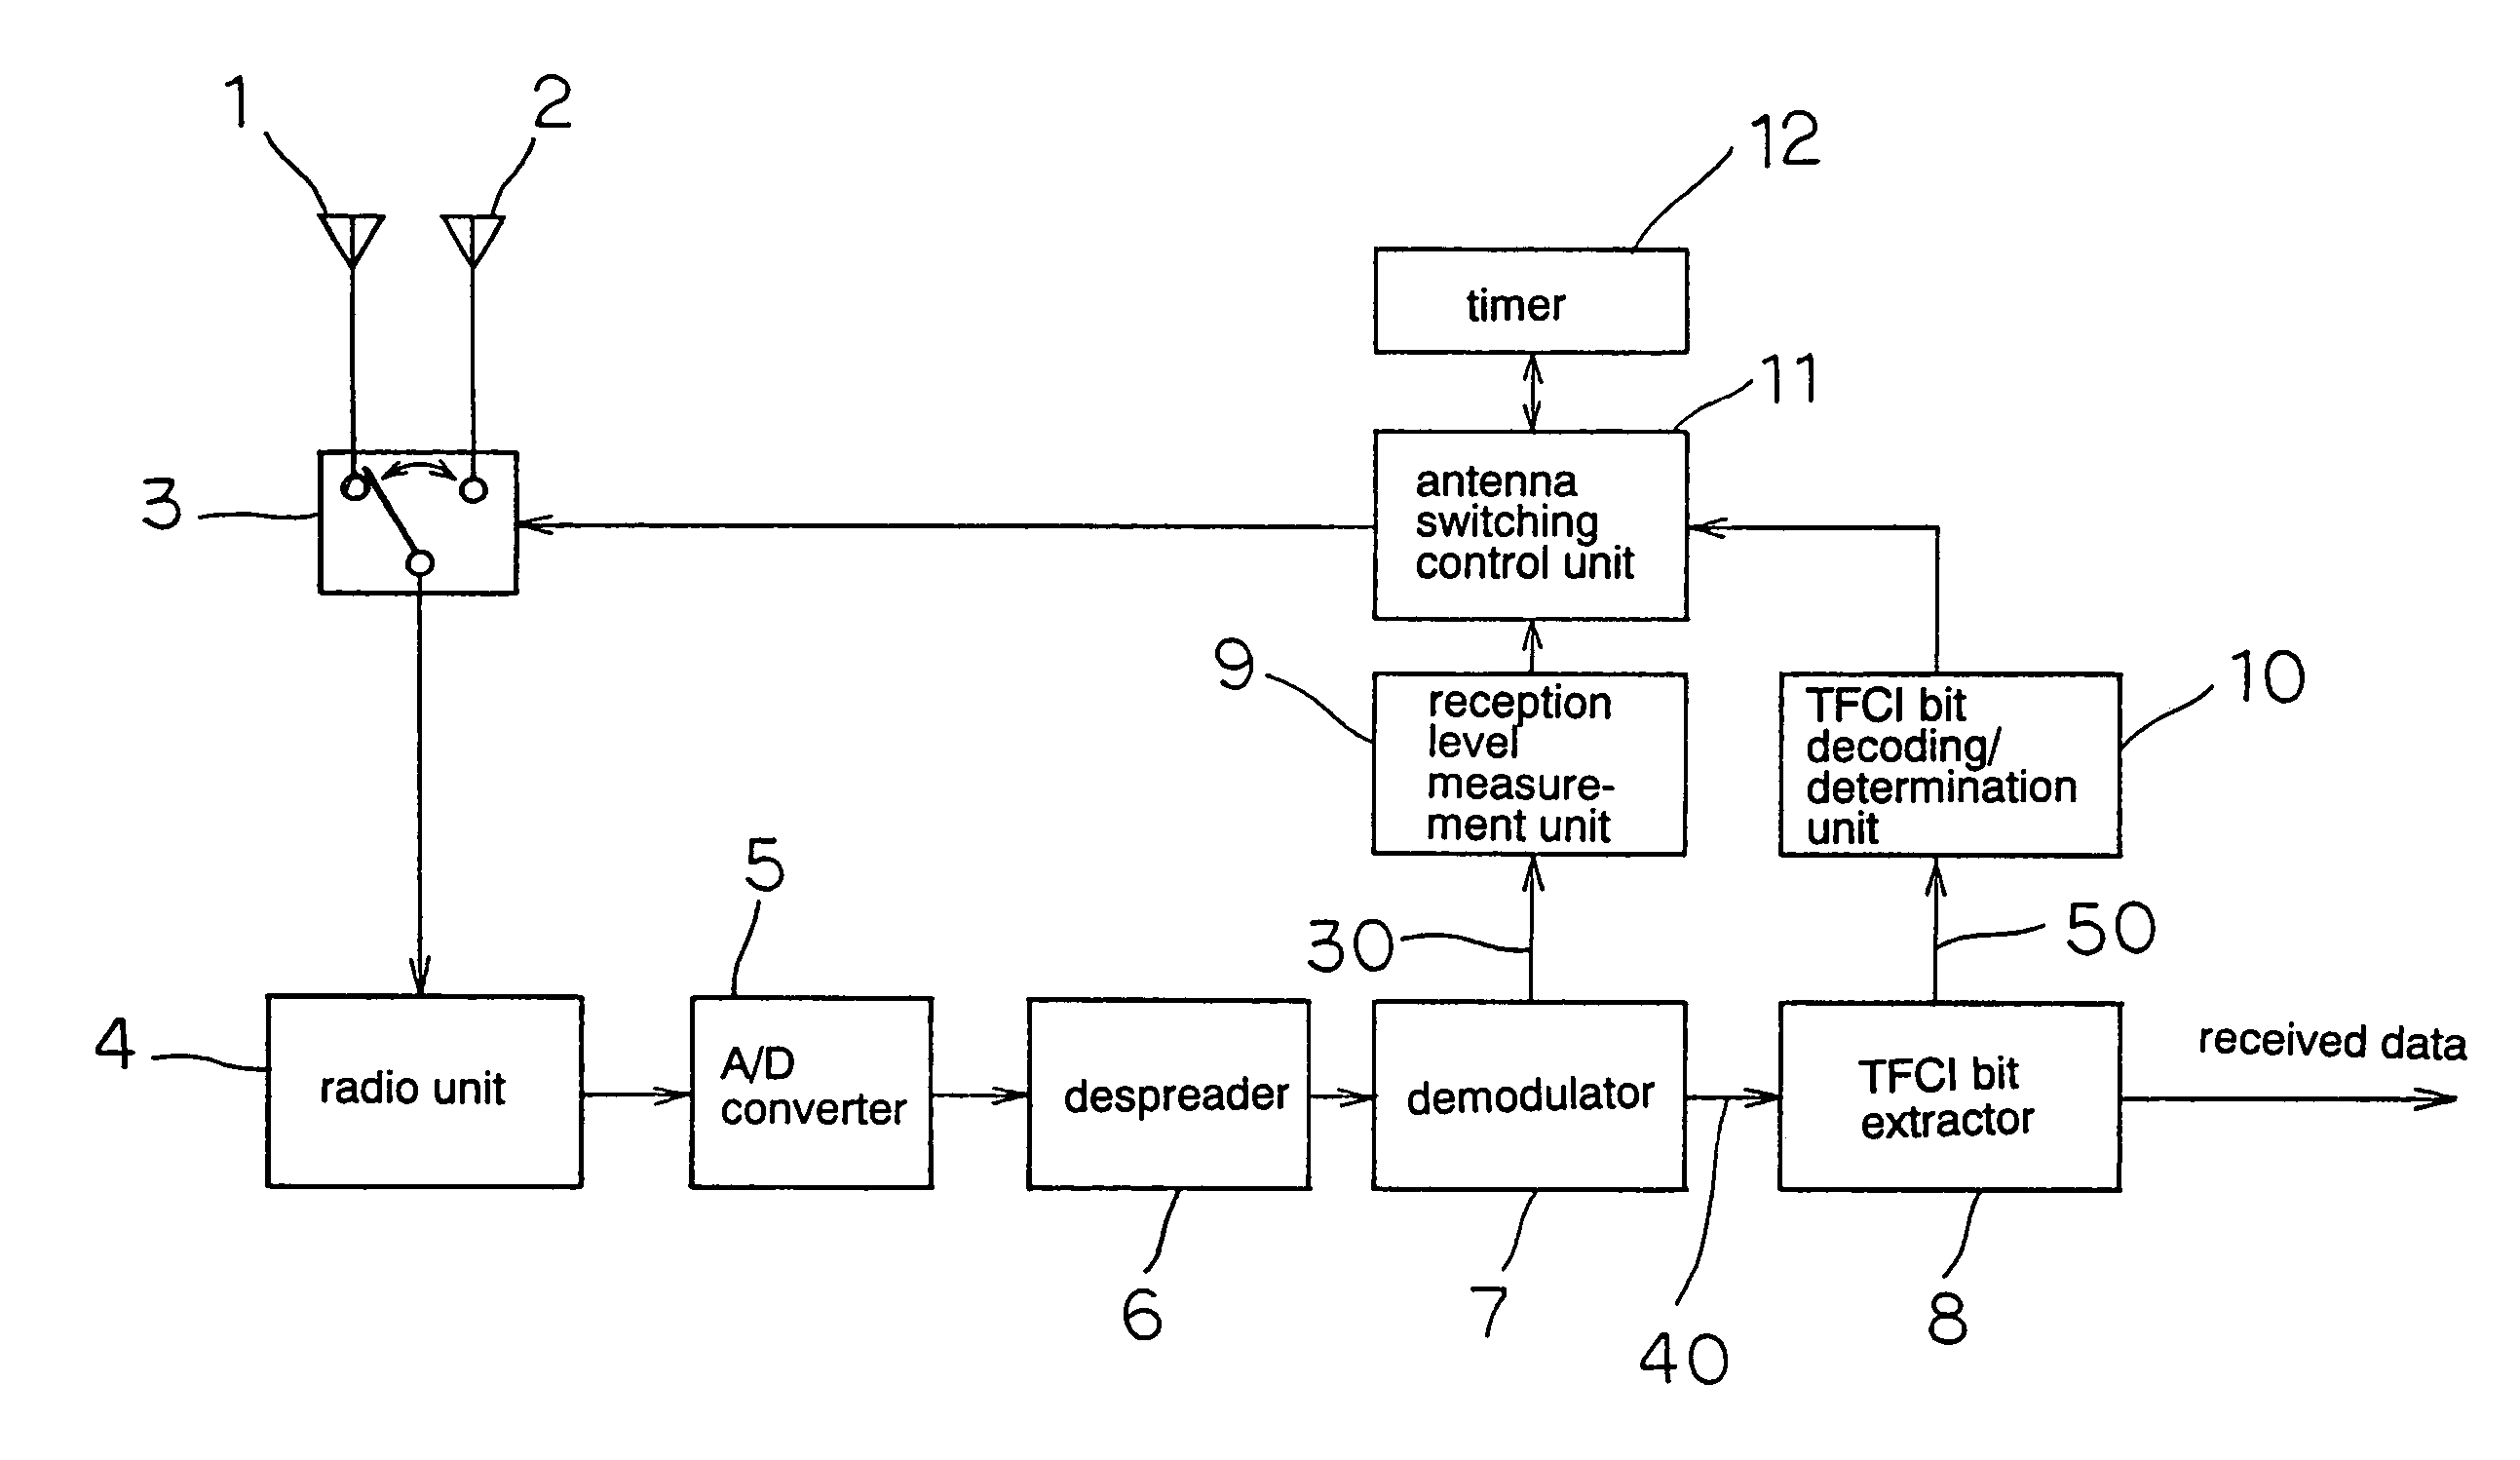 Antenna-switching diversity receiver capable of switching antennas without deterioration of reception characteristic even when applied to the CDMA communication method